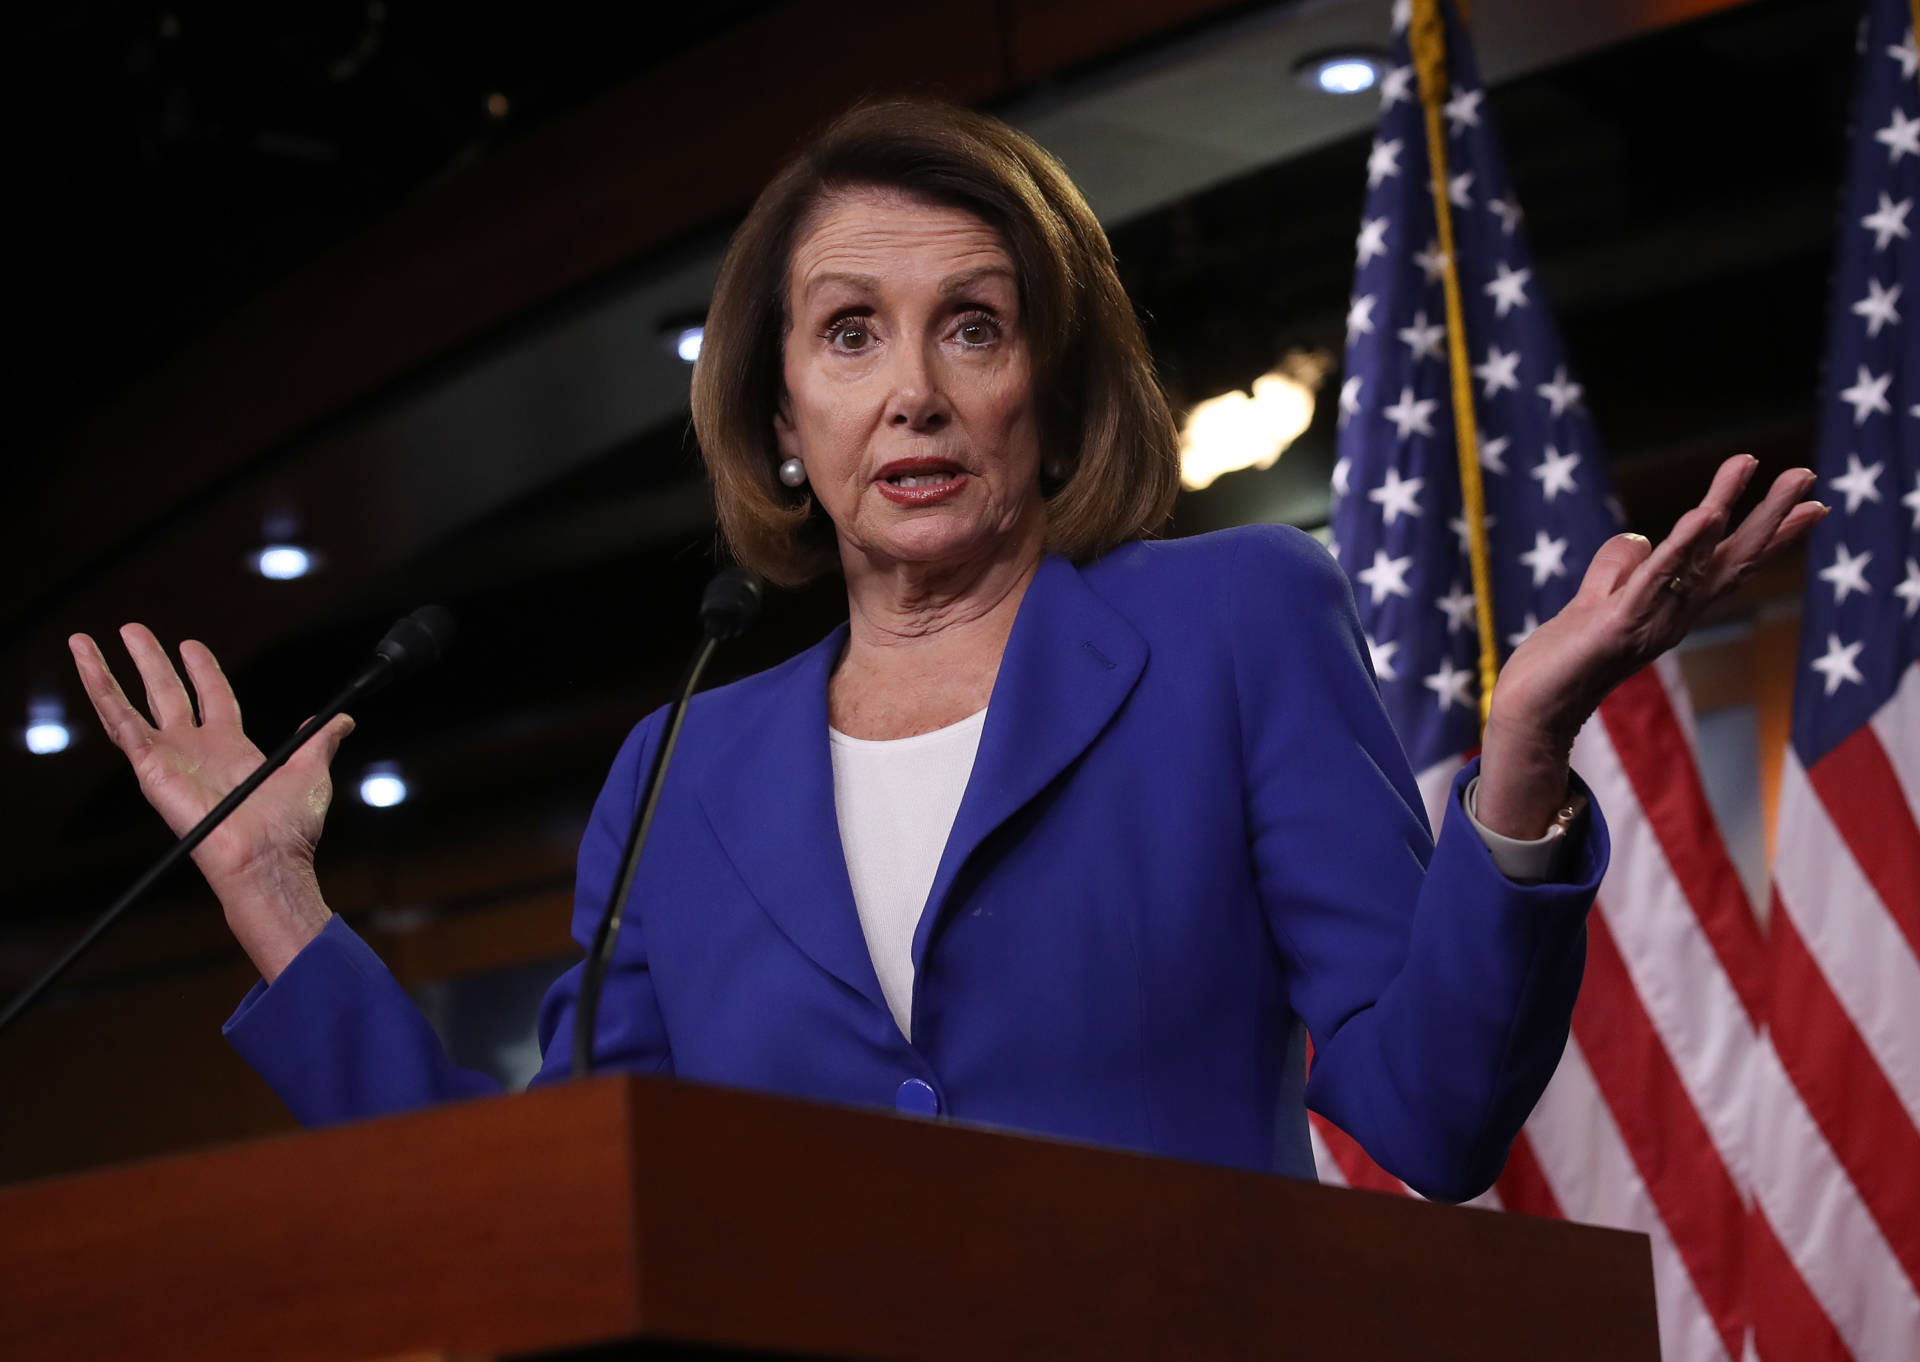 U.S. Speaker of the House Nancy Pelosi answers questions during her weekly press conference on Jan. 31, 2019, in Washington, D.C.  Win McNamee/Getty Images